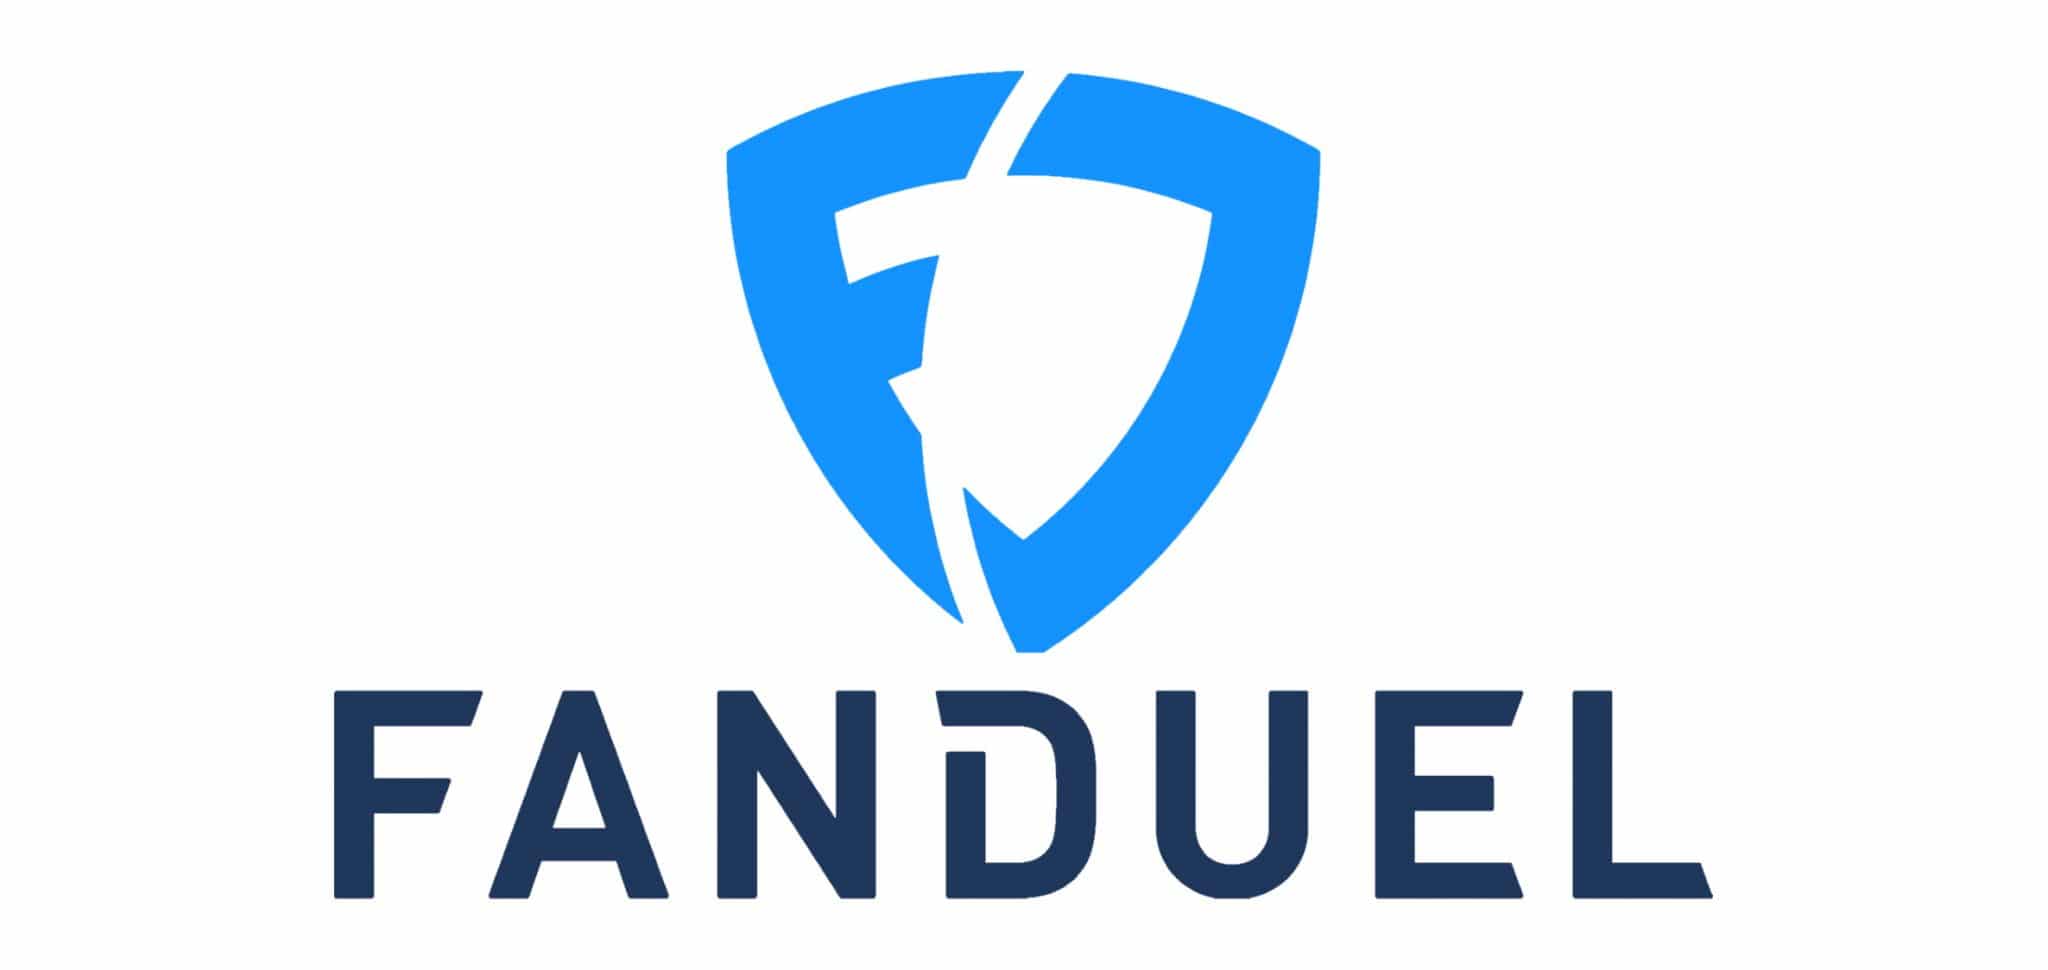 fanduel sportsbook at valley forge casino re